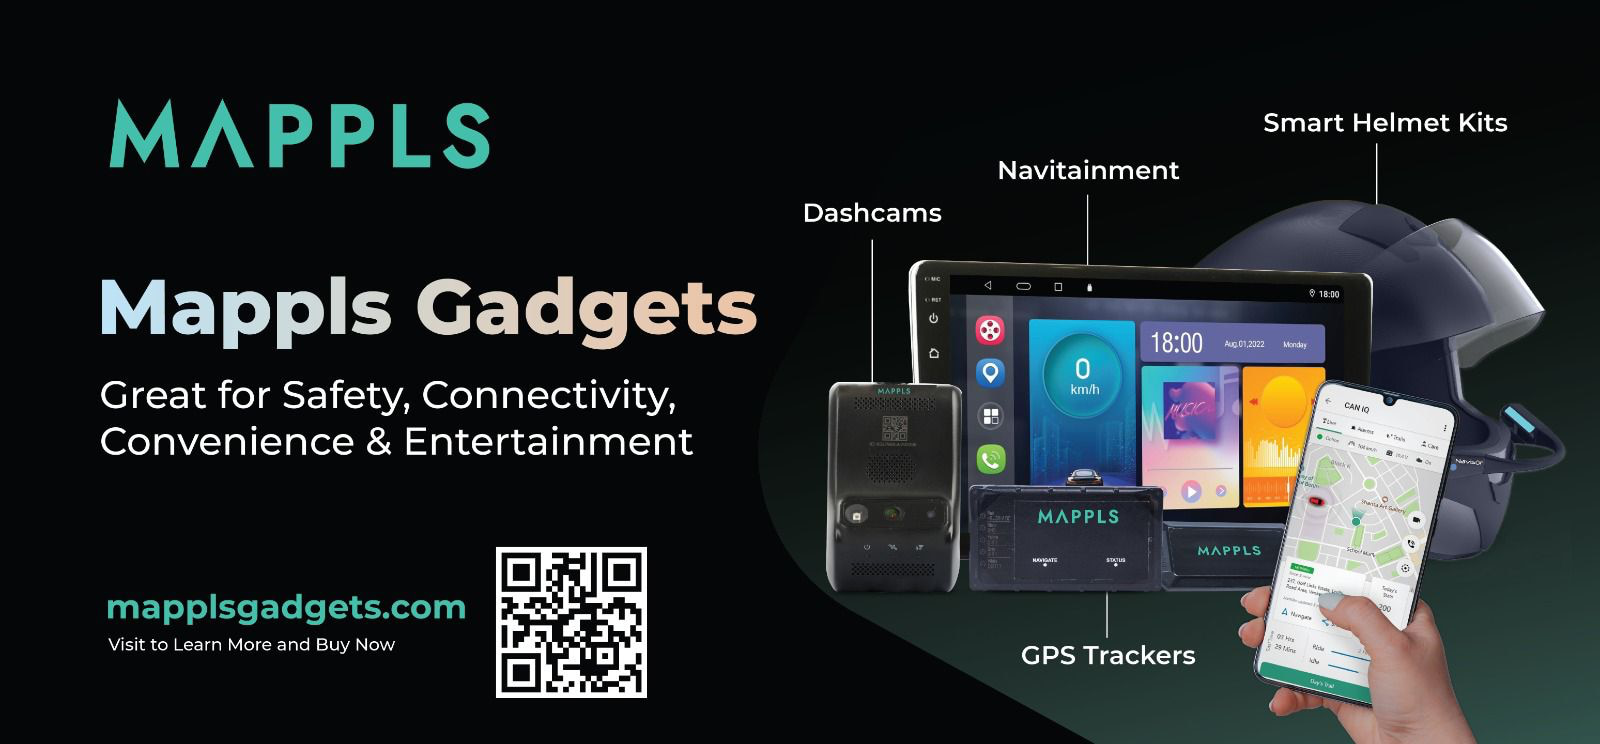 Mappls Gadgets For Cars And Two Wheelers Including GPS Trackers Dash Cameras In Dash Navitainment Systems And Smart Helmet Kits 